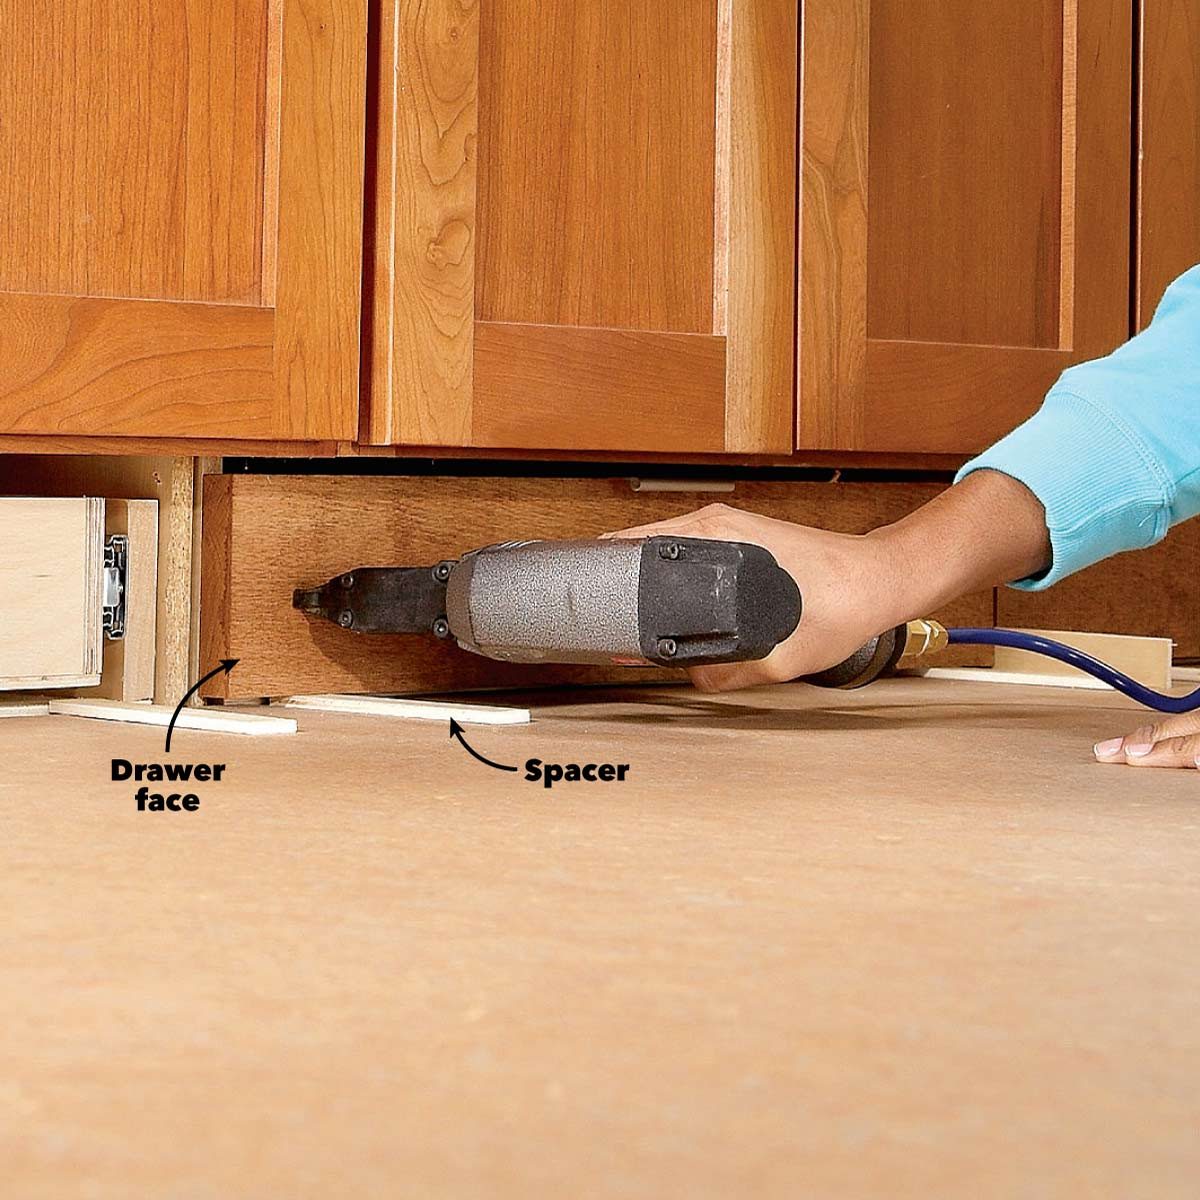 https://www.familyhandyman.com/wp-content/uploads/2019/04/FH09MAY_498_58_030-under-cabinet-drawer-add-drawer-front.jpg?fit=640%2C640